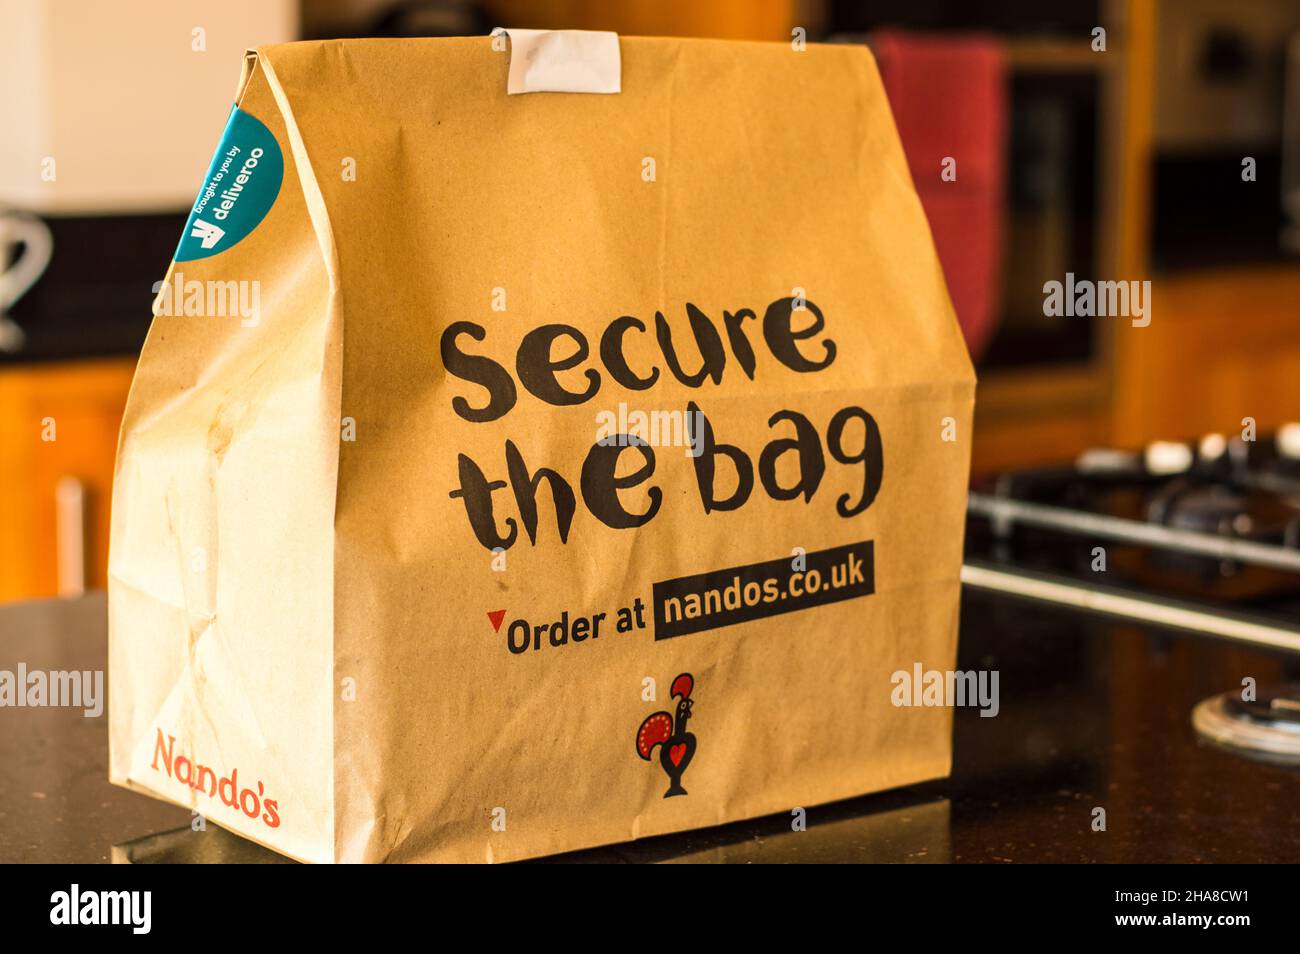 Nandos peri peri chicken take away packed in cardboard box for environment friendly responsible packaging. Stock Photo